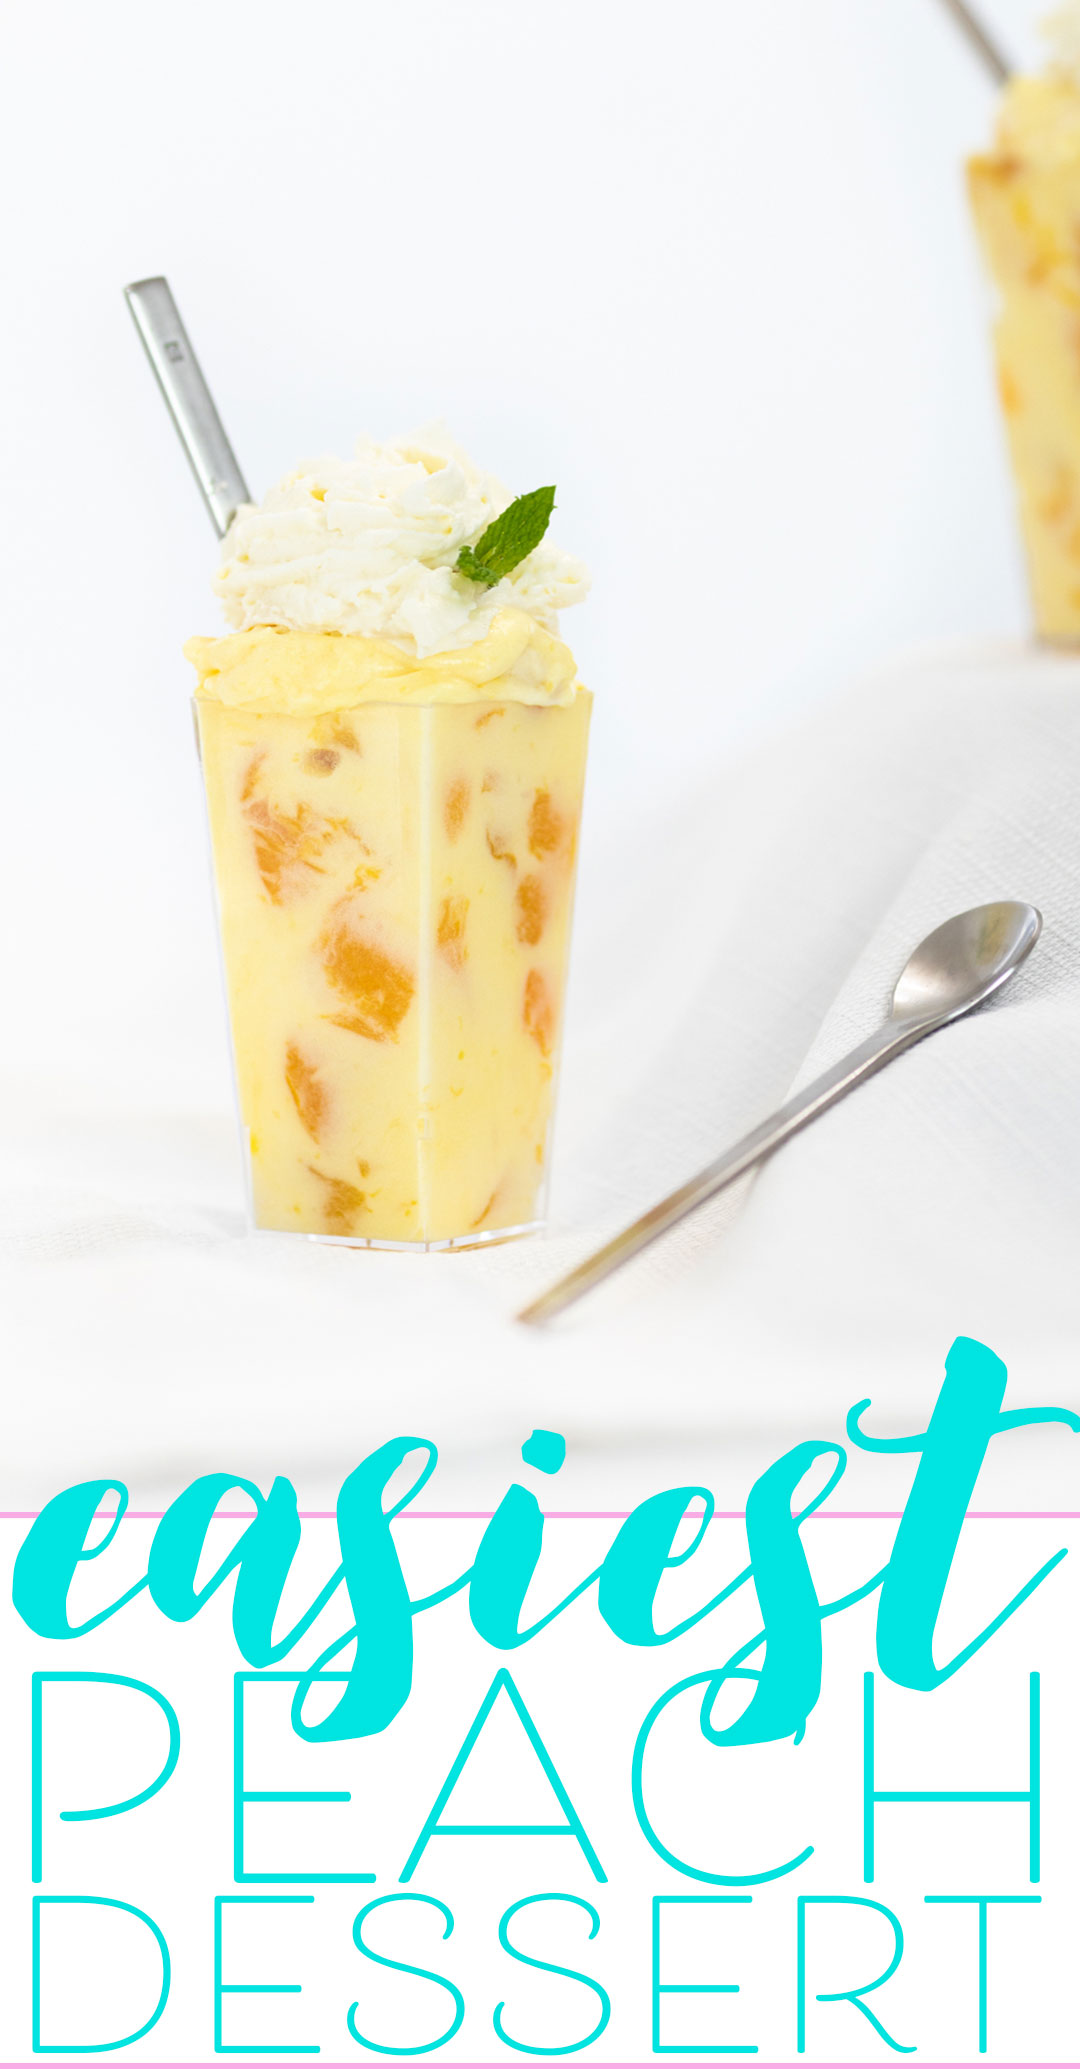 Peach Dessert with only 3 easy ingredients. Made in minutes, ready in an hour. Oh yum.